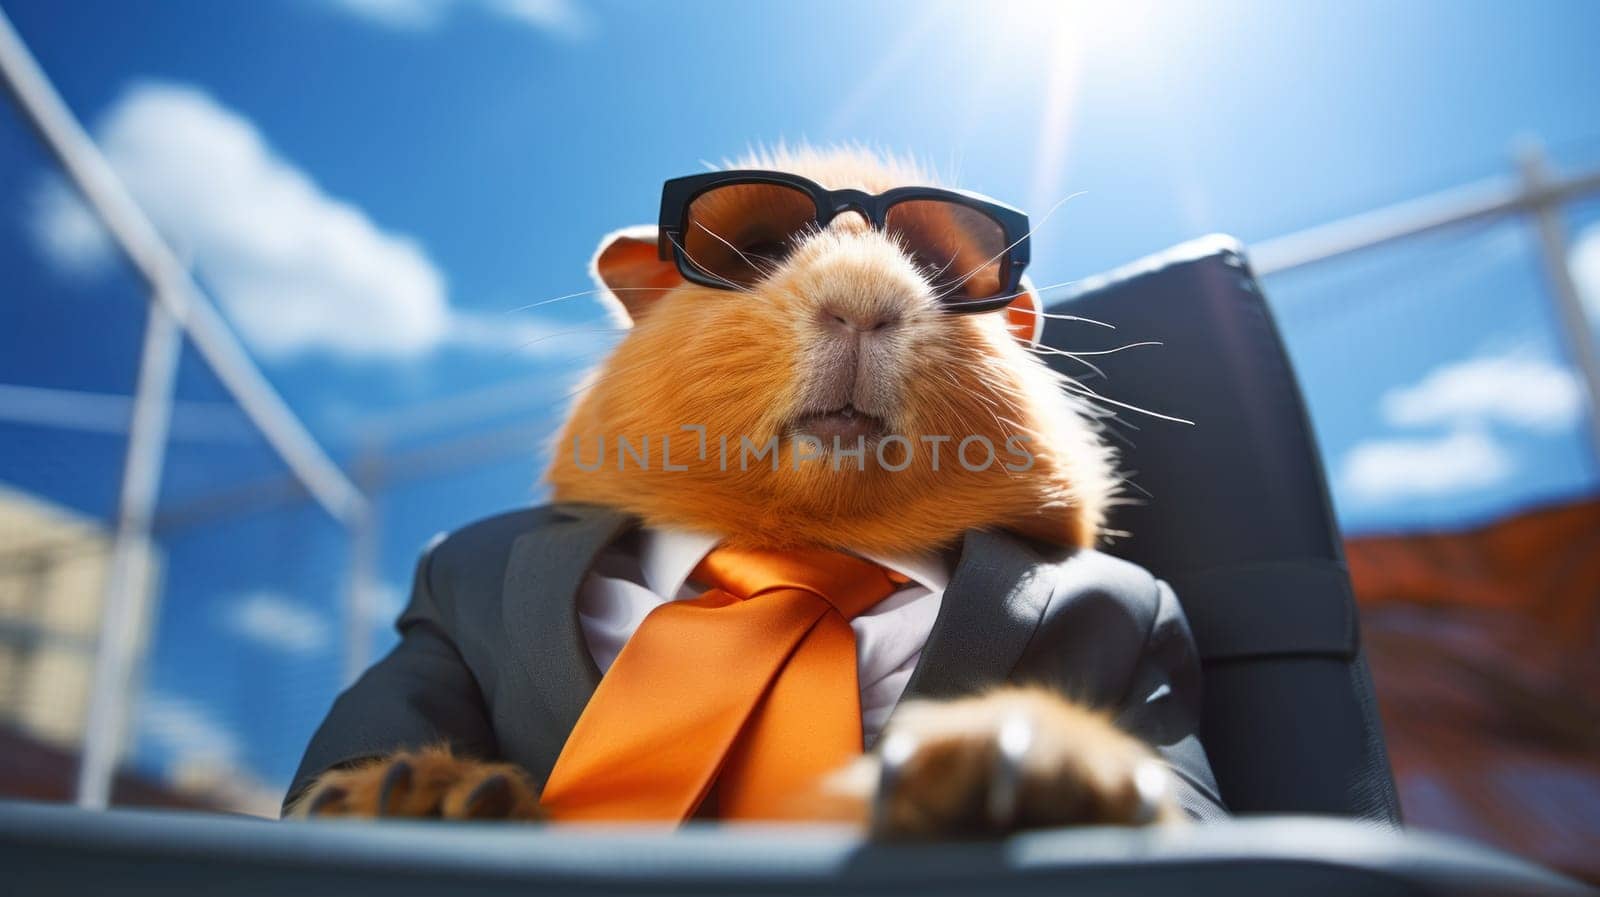 A guinea pig wearing a suit and tie with sunglasses, AI by starush